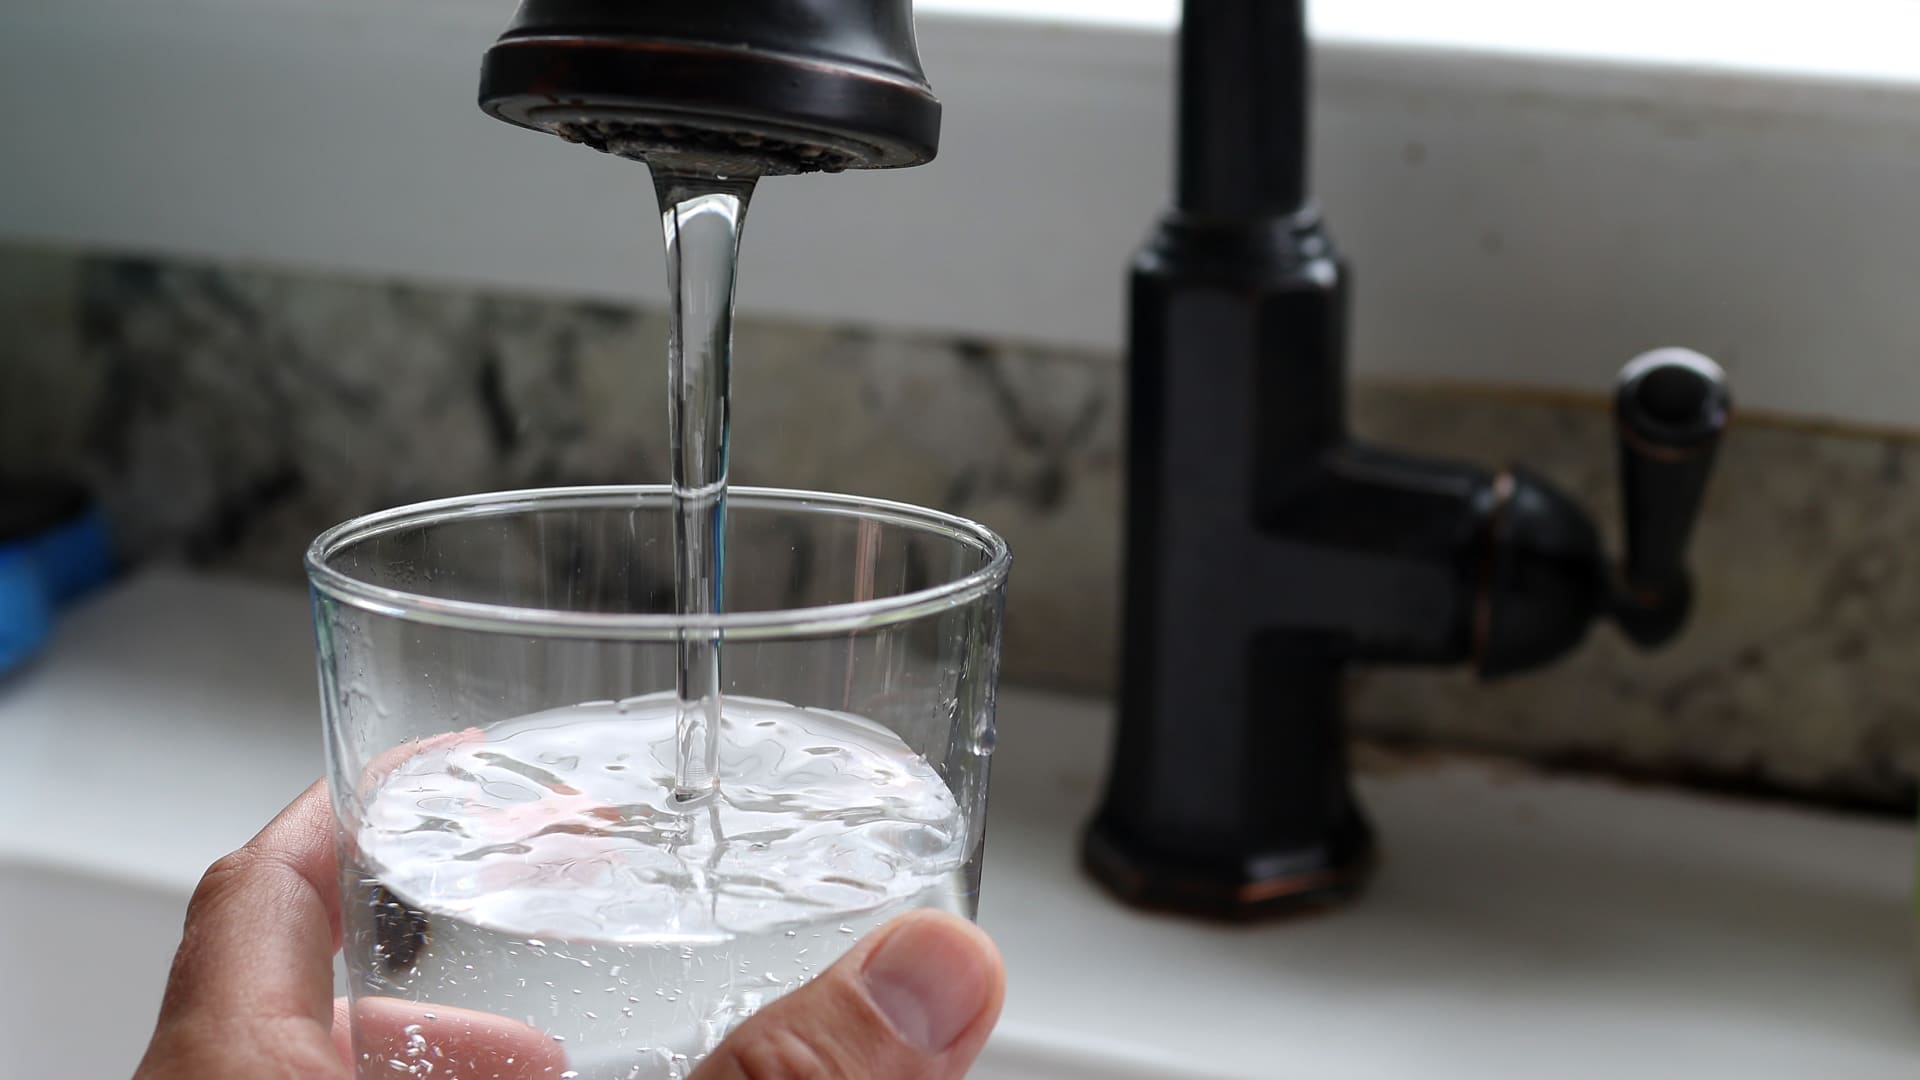 Forever chemicals’ drinking water rules to cost $1.5 billion a year